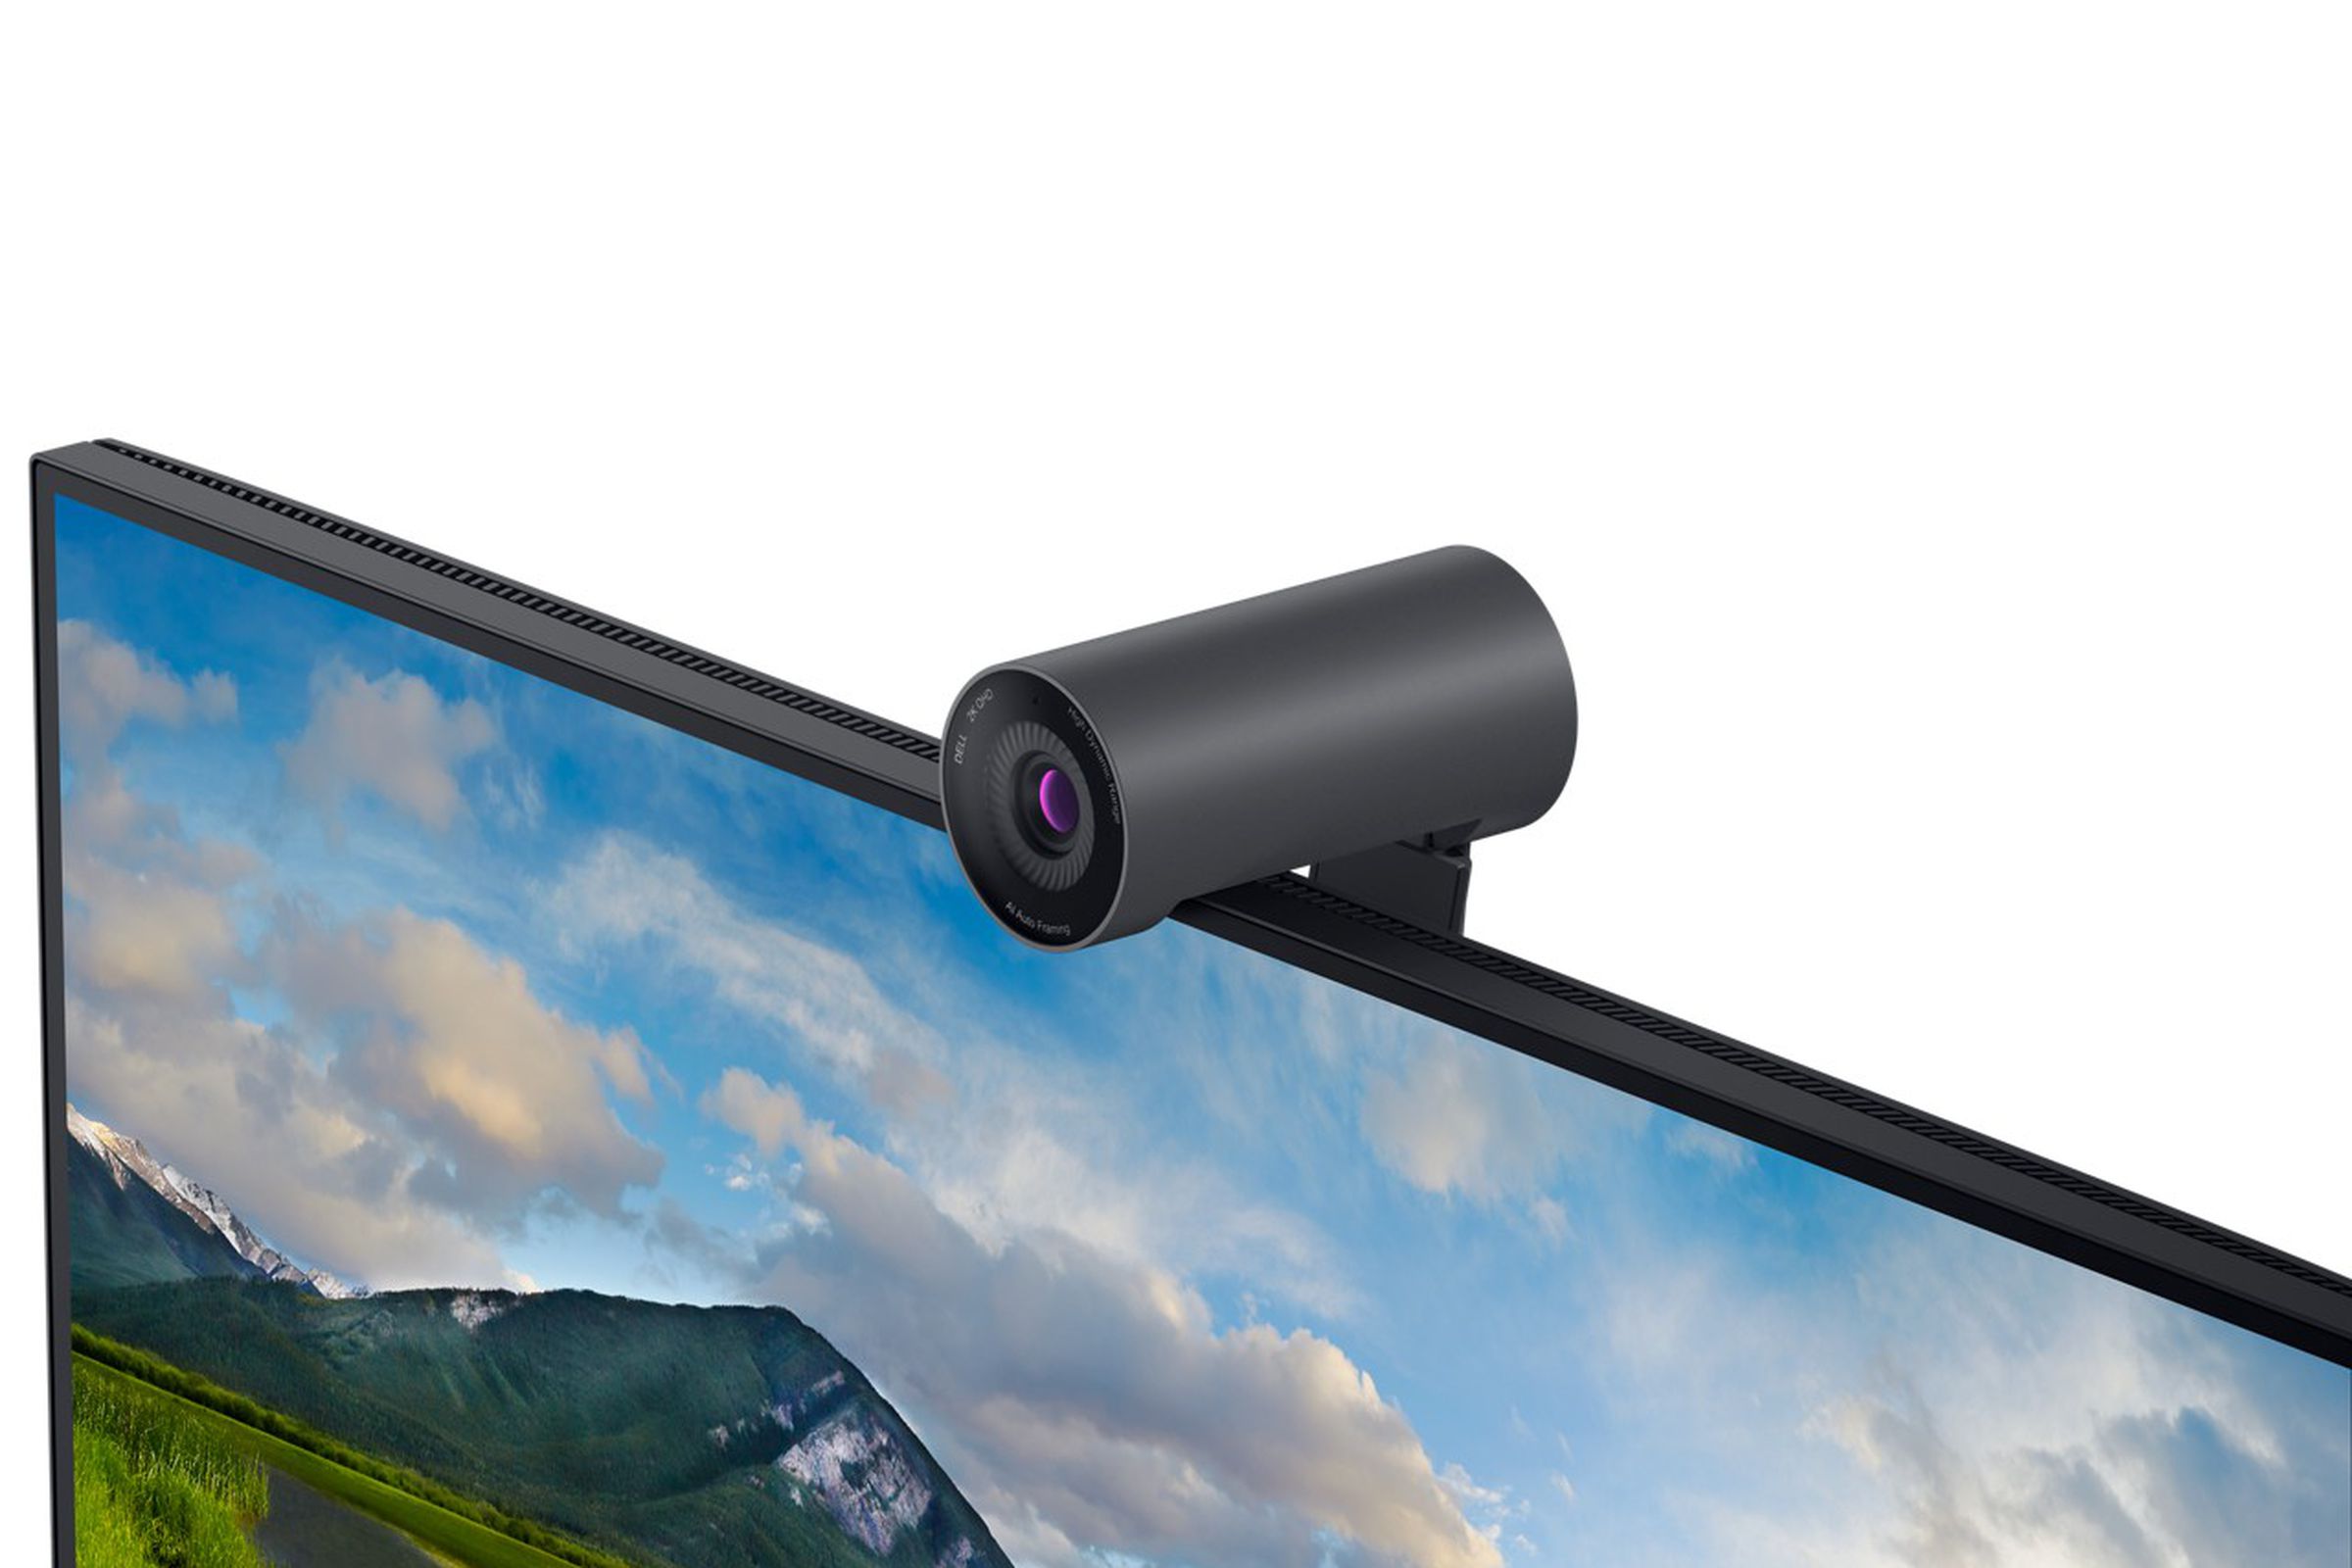 The Dell Pro Webcam WB5023 has an integrated universal mounting clip and comes with a magnetic lens cap.